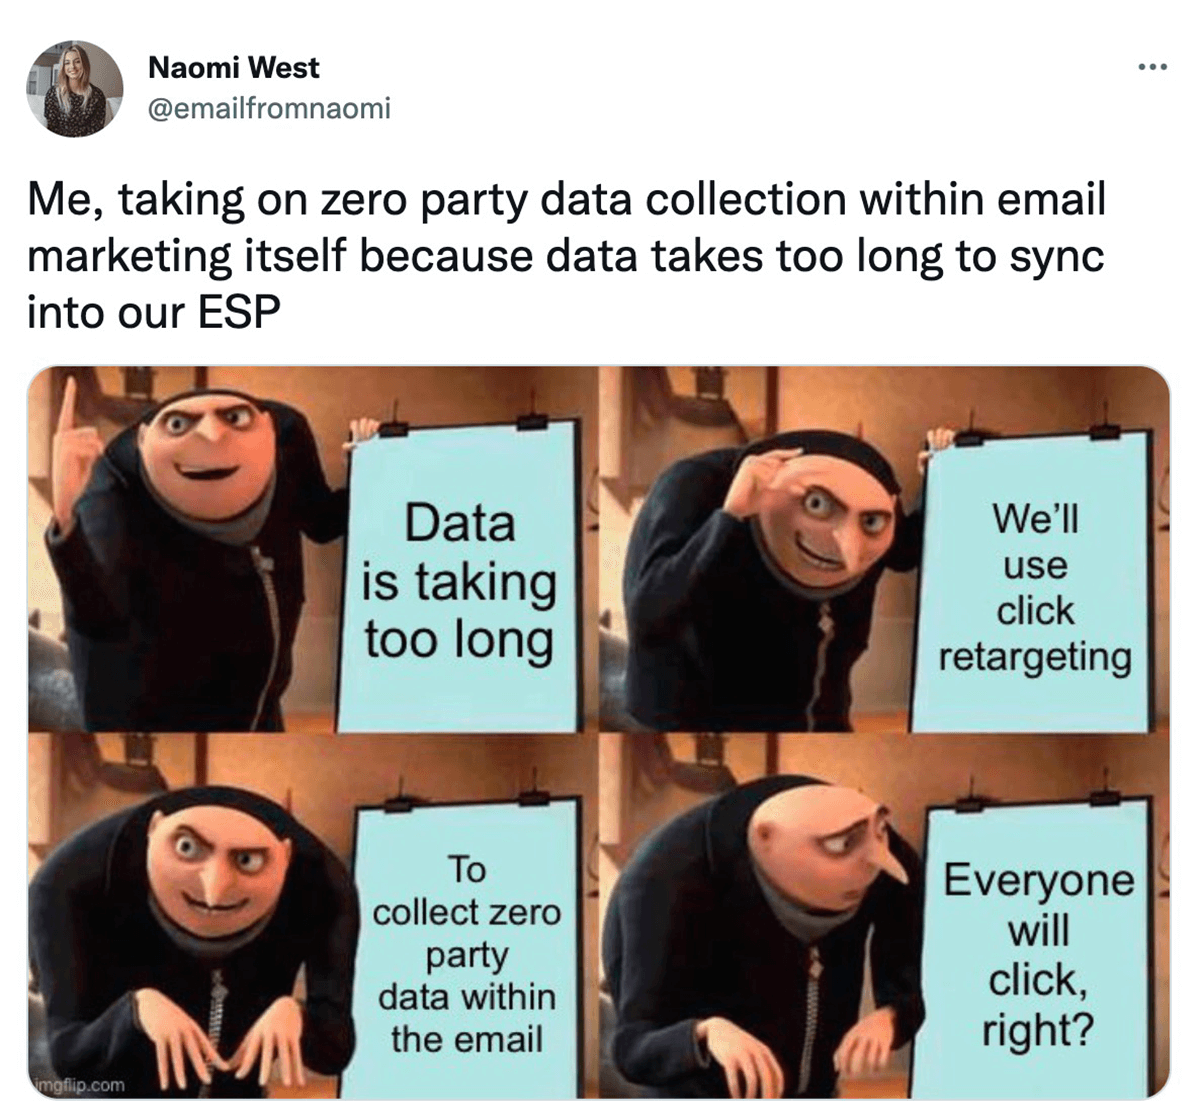 @emailfromnaomi on twitter: Me, taking on zero party data collection within email marketing itself because data takes too long to sync into our ESP. Gru with a presentation meme: 1. Data is taking too long 2. We'll use click retargeting 3. To collect zero party data within the email 4. Everyone will click, right?